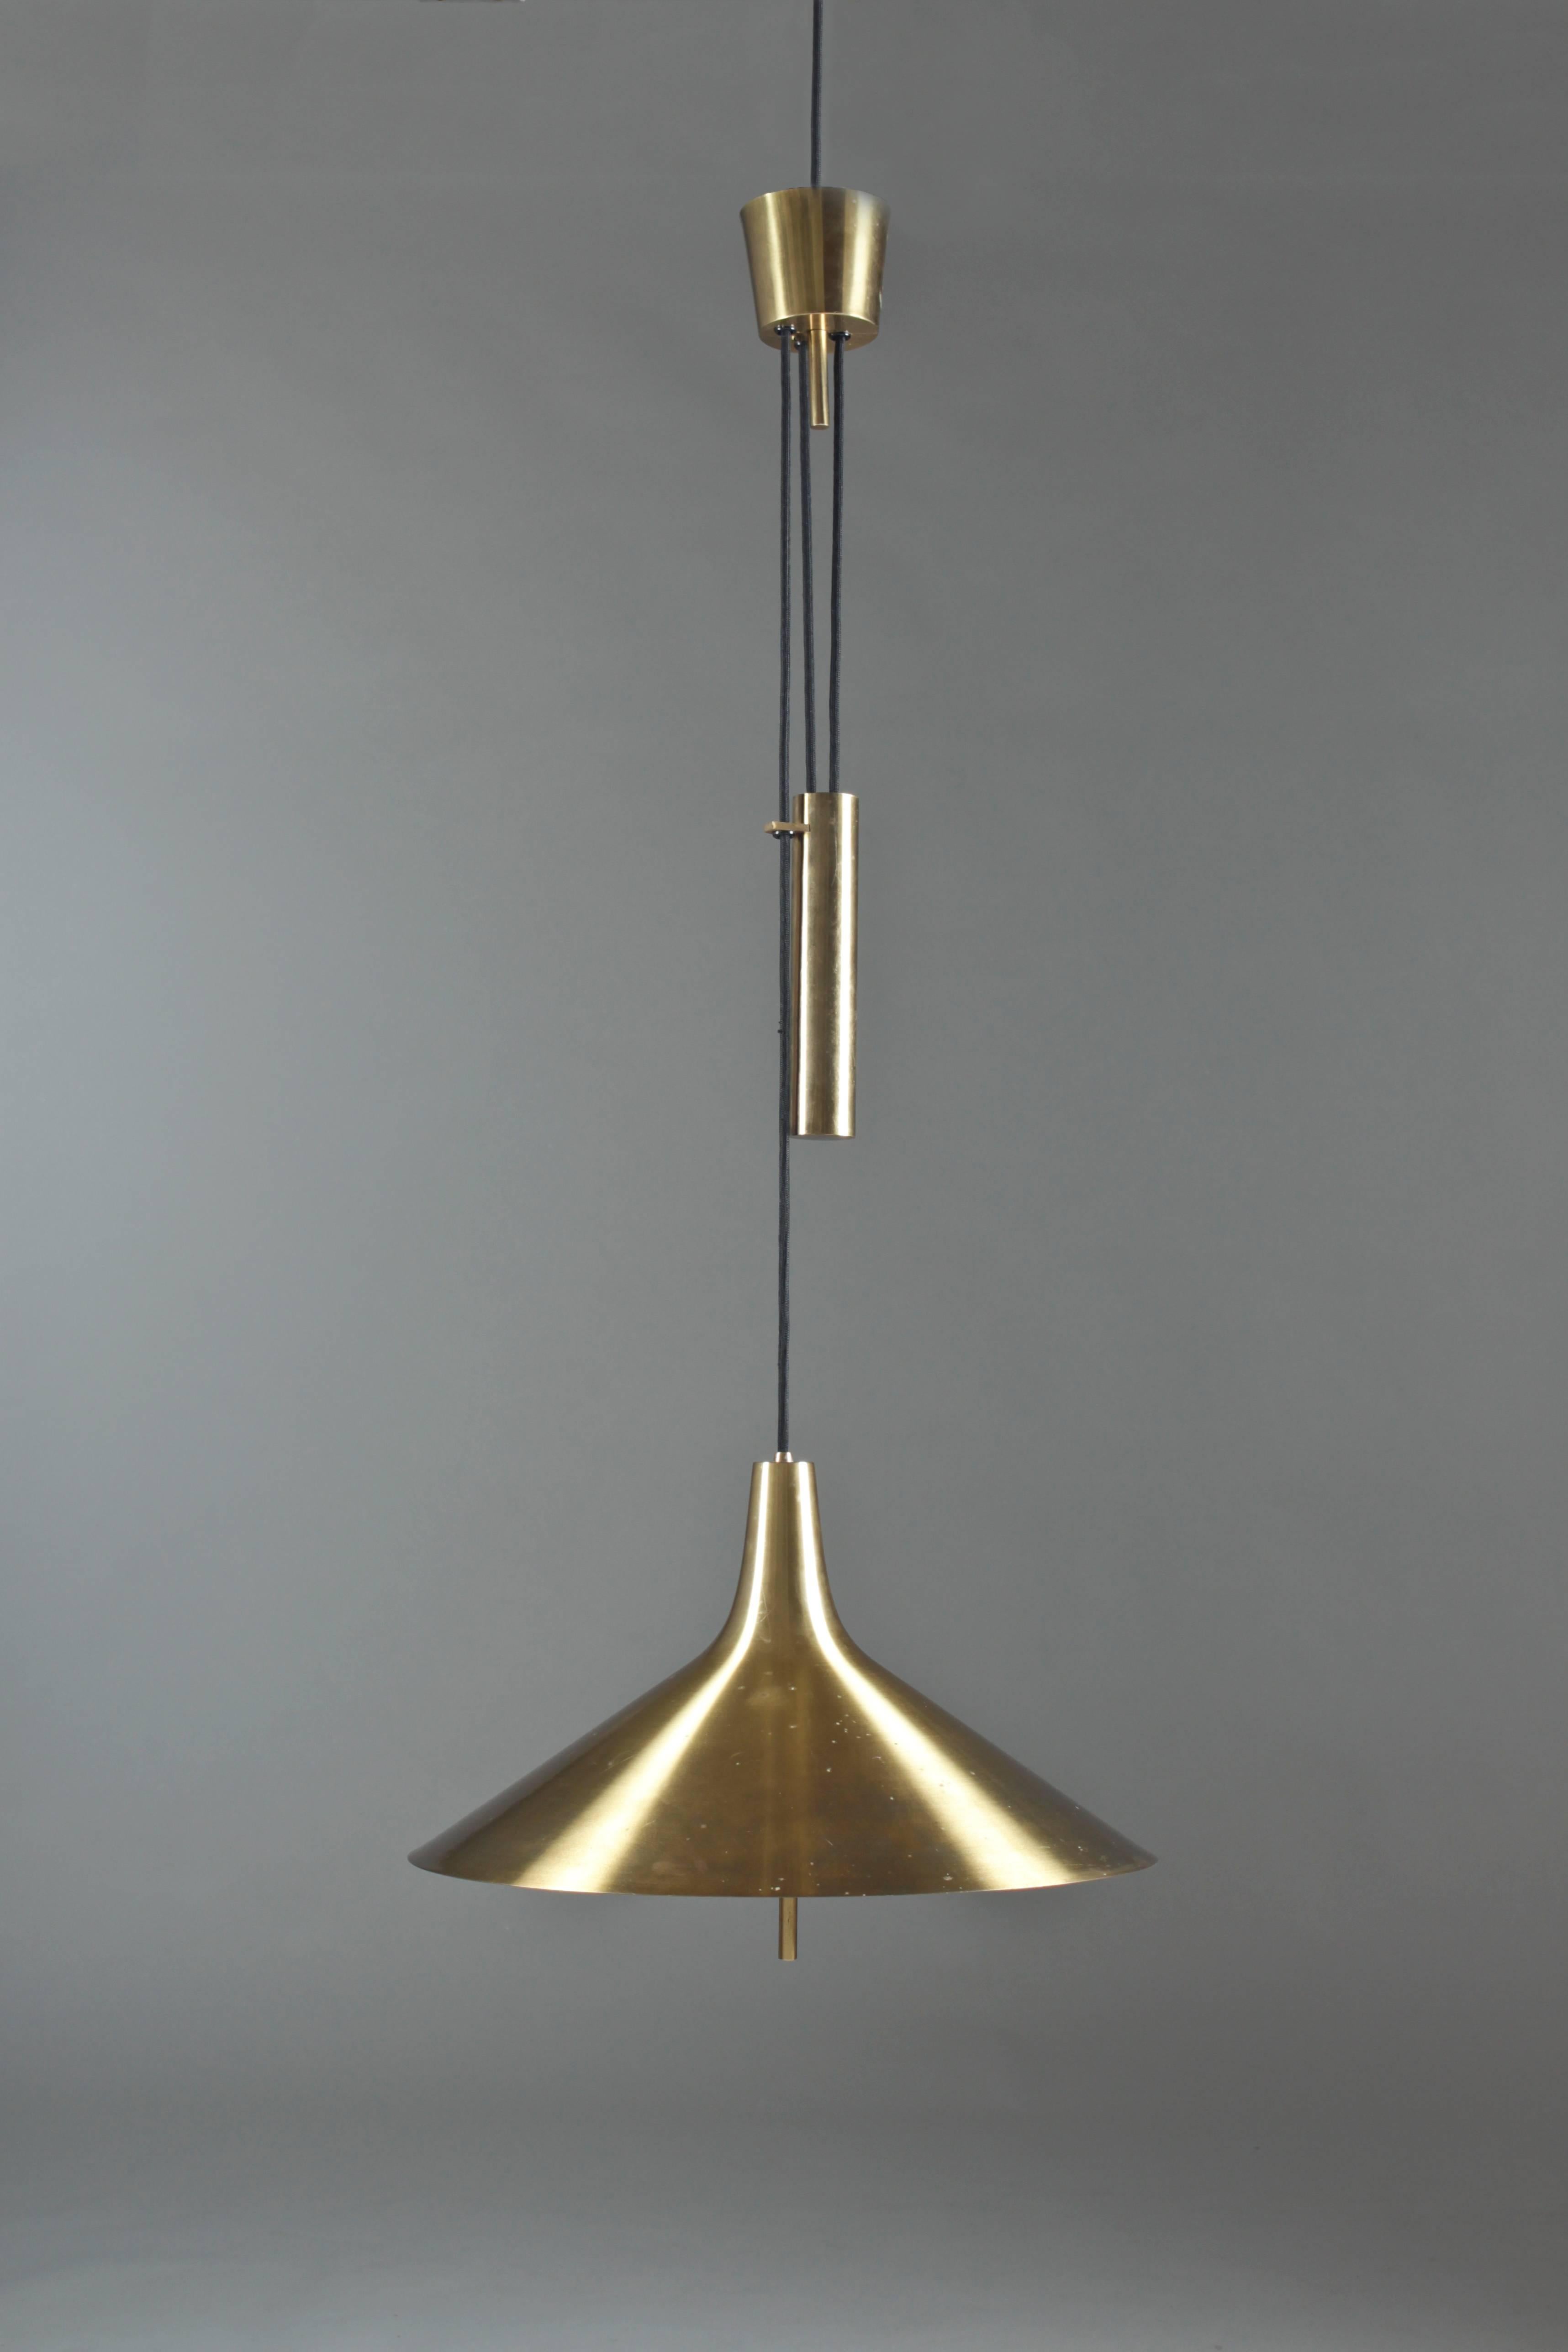 Stunning pendant in brass with adjustable height. The lamp features a black fabric wire connected to a solid brass weight and canopy. The brass shows beautiful patina.